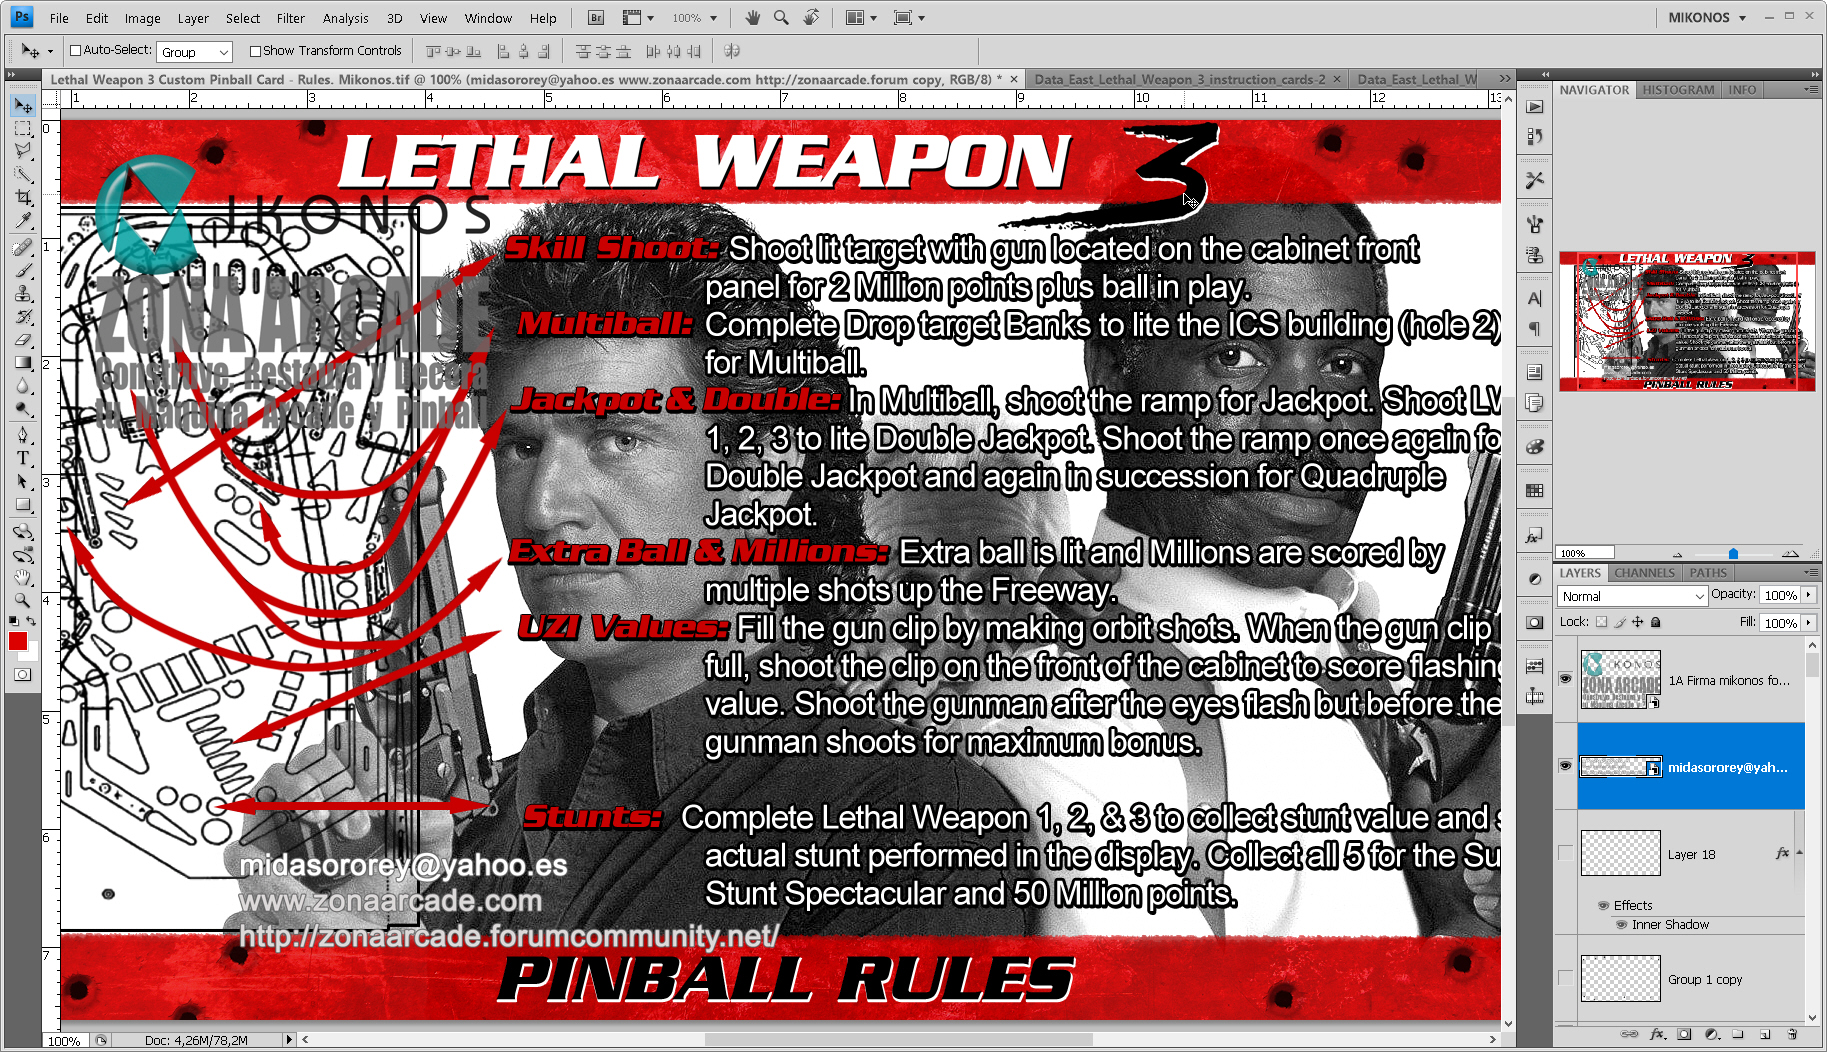 Lethal Weapon 3%20Custom%20Pinball%20Card%20-%20Rules.%20Mikonos2